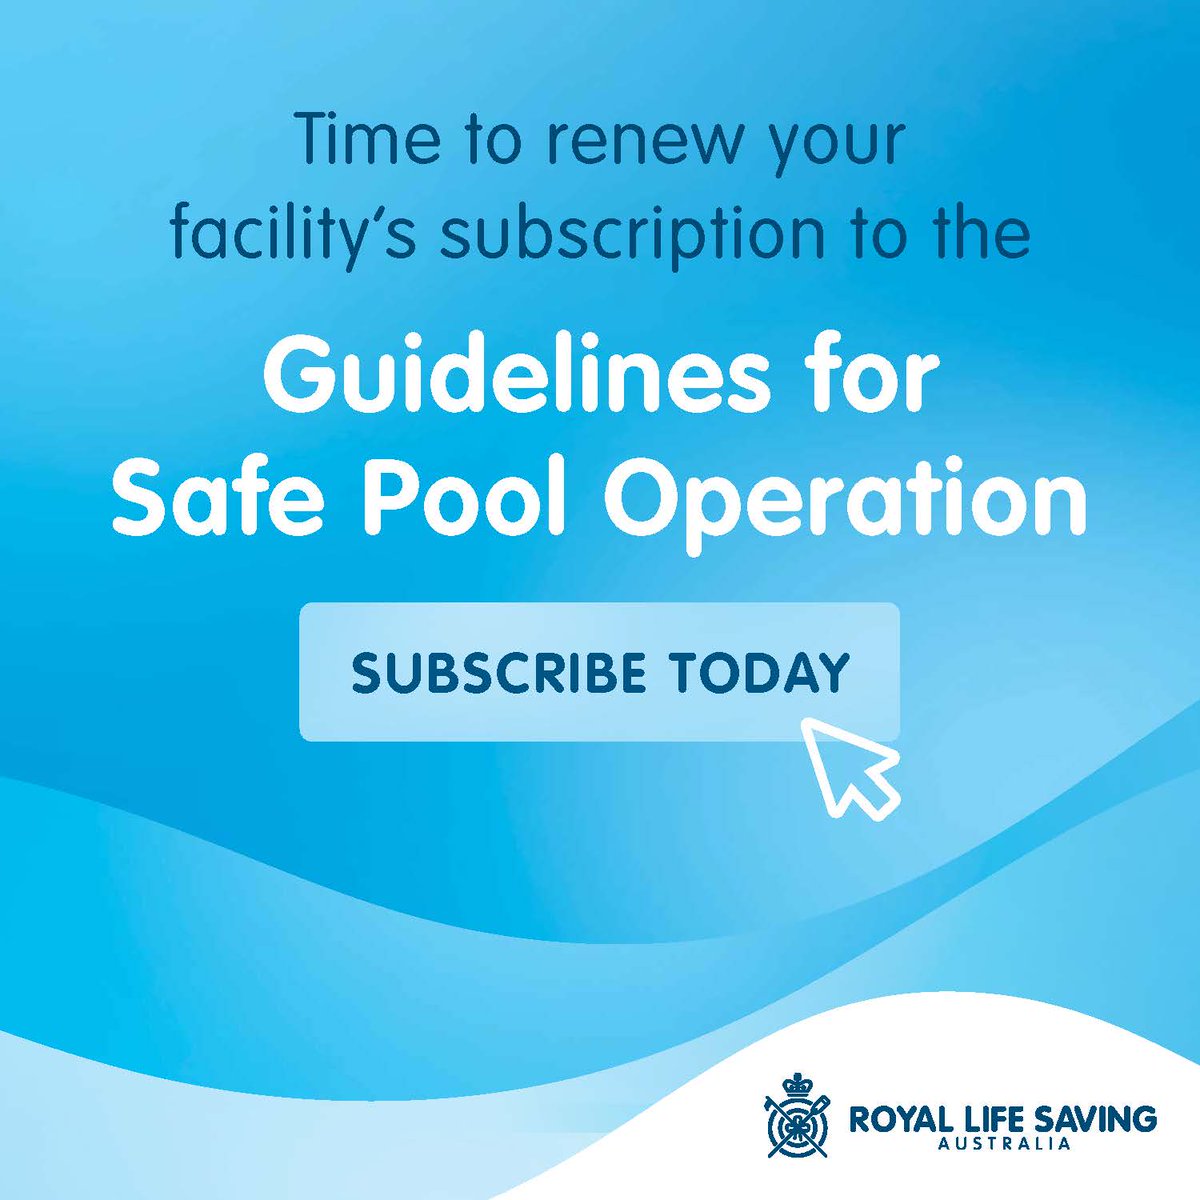 Aquatic industry, have you updated your facility’s subscription to the Guidelines for Safe Pool Operations (GSPO) yet…⁉️ The #GSPO is a set of national industry standards that outline the minimum safety requirements for aquatic facilities. Subscribe here: bit.ly/3O3aMTT